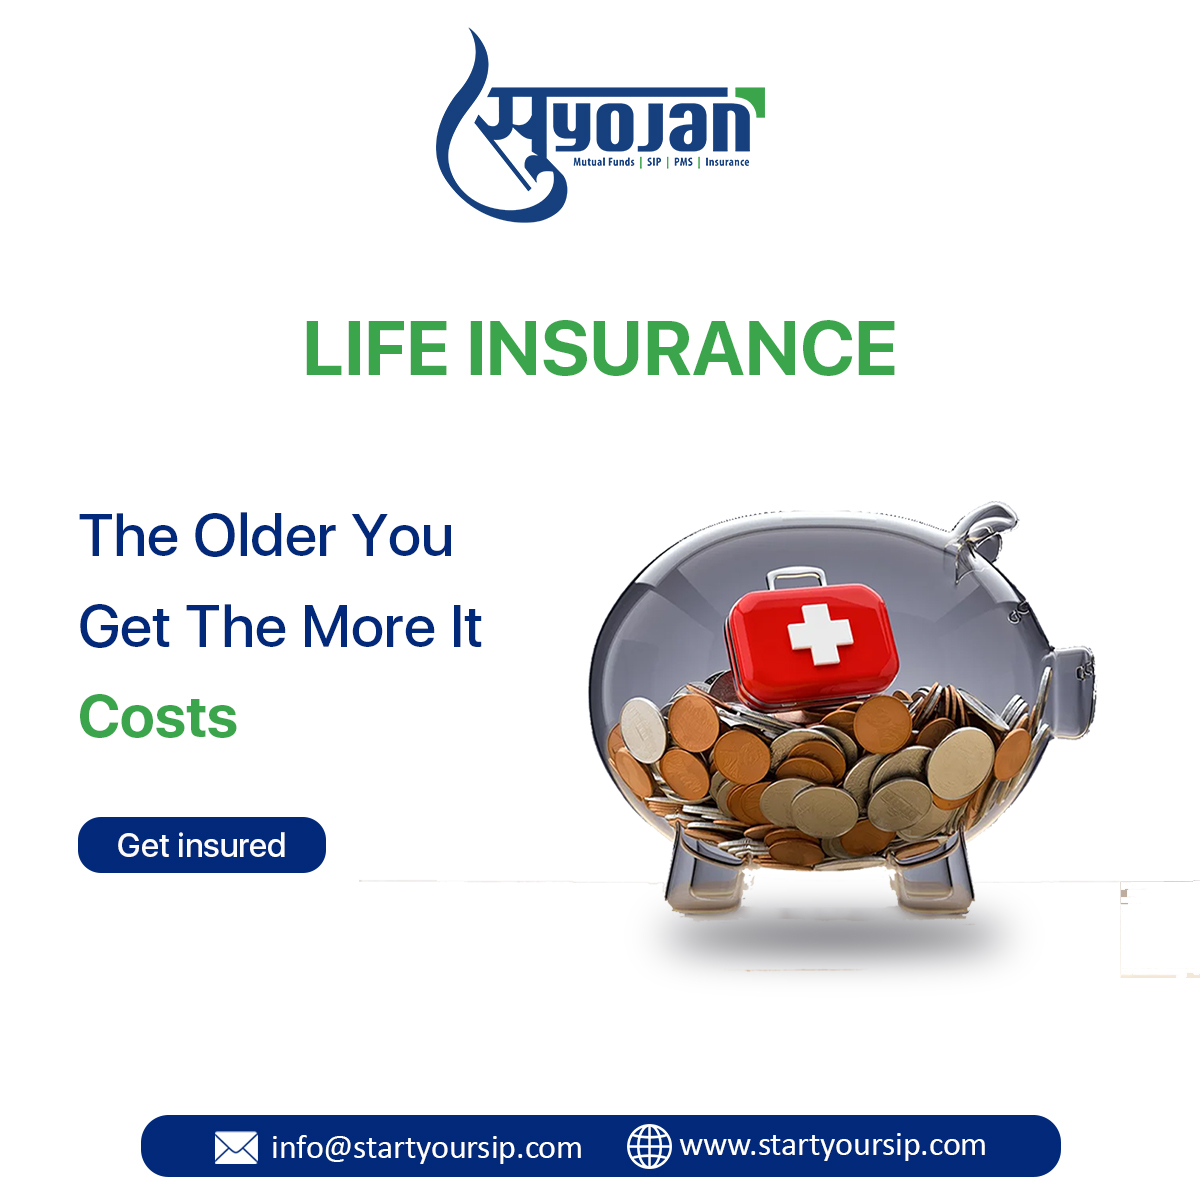 Life Insurance - The older you get the more it Costs

Get Insured Today

#lifeinsurance #termplan #terminsurance #assurance #insurancepolicy #securedfamily #protection #familyprotection #protectionplan #family #health #terminsurancepolicy #SuyojanFinmart #Suyojan #TeamSuyojan